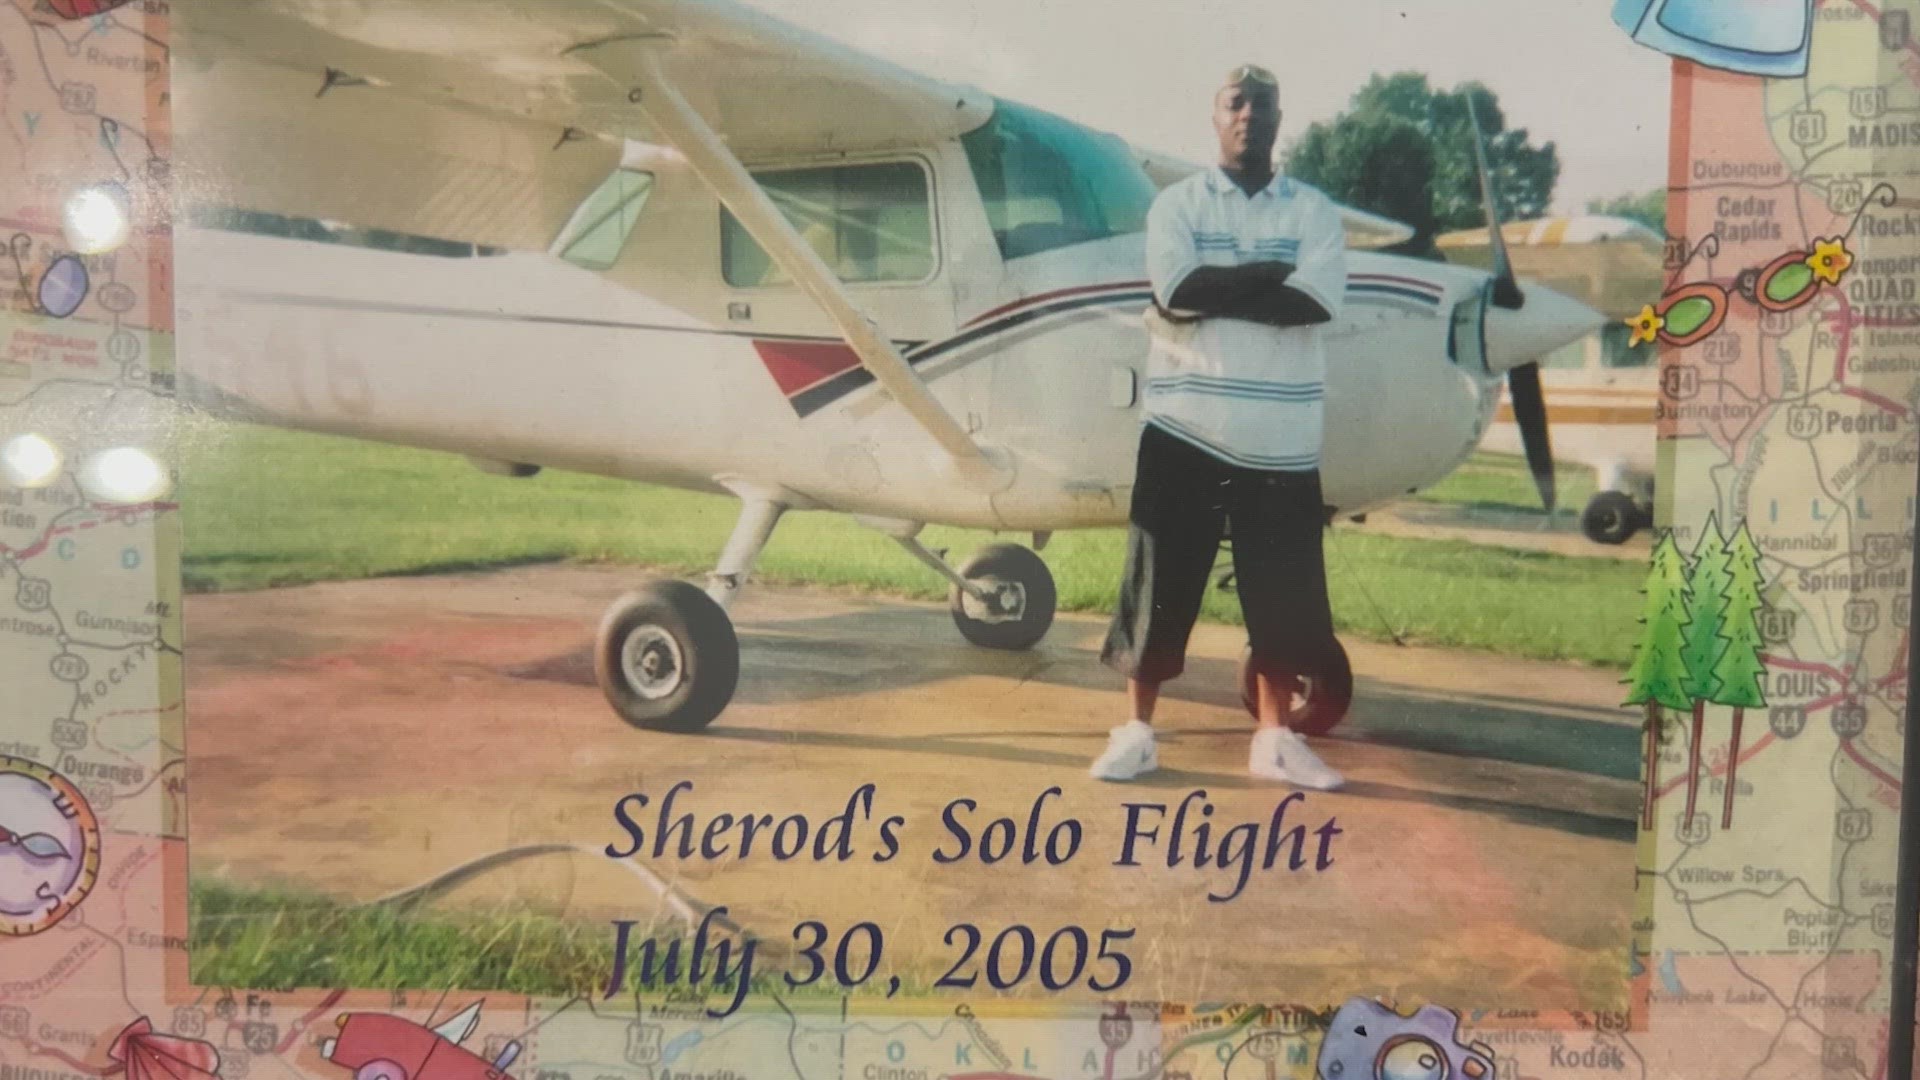 The family of 49-year-old Sherod Coleman said in an exclusive interview the pilot had a love for aviation and was a psychotherapist working on his first book.